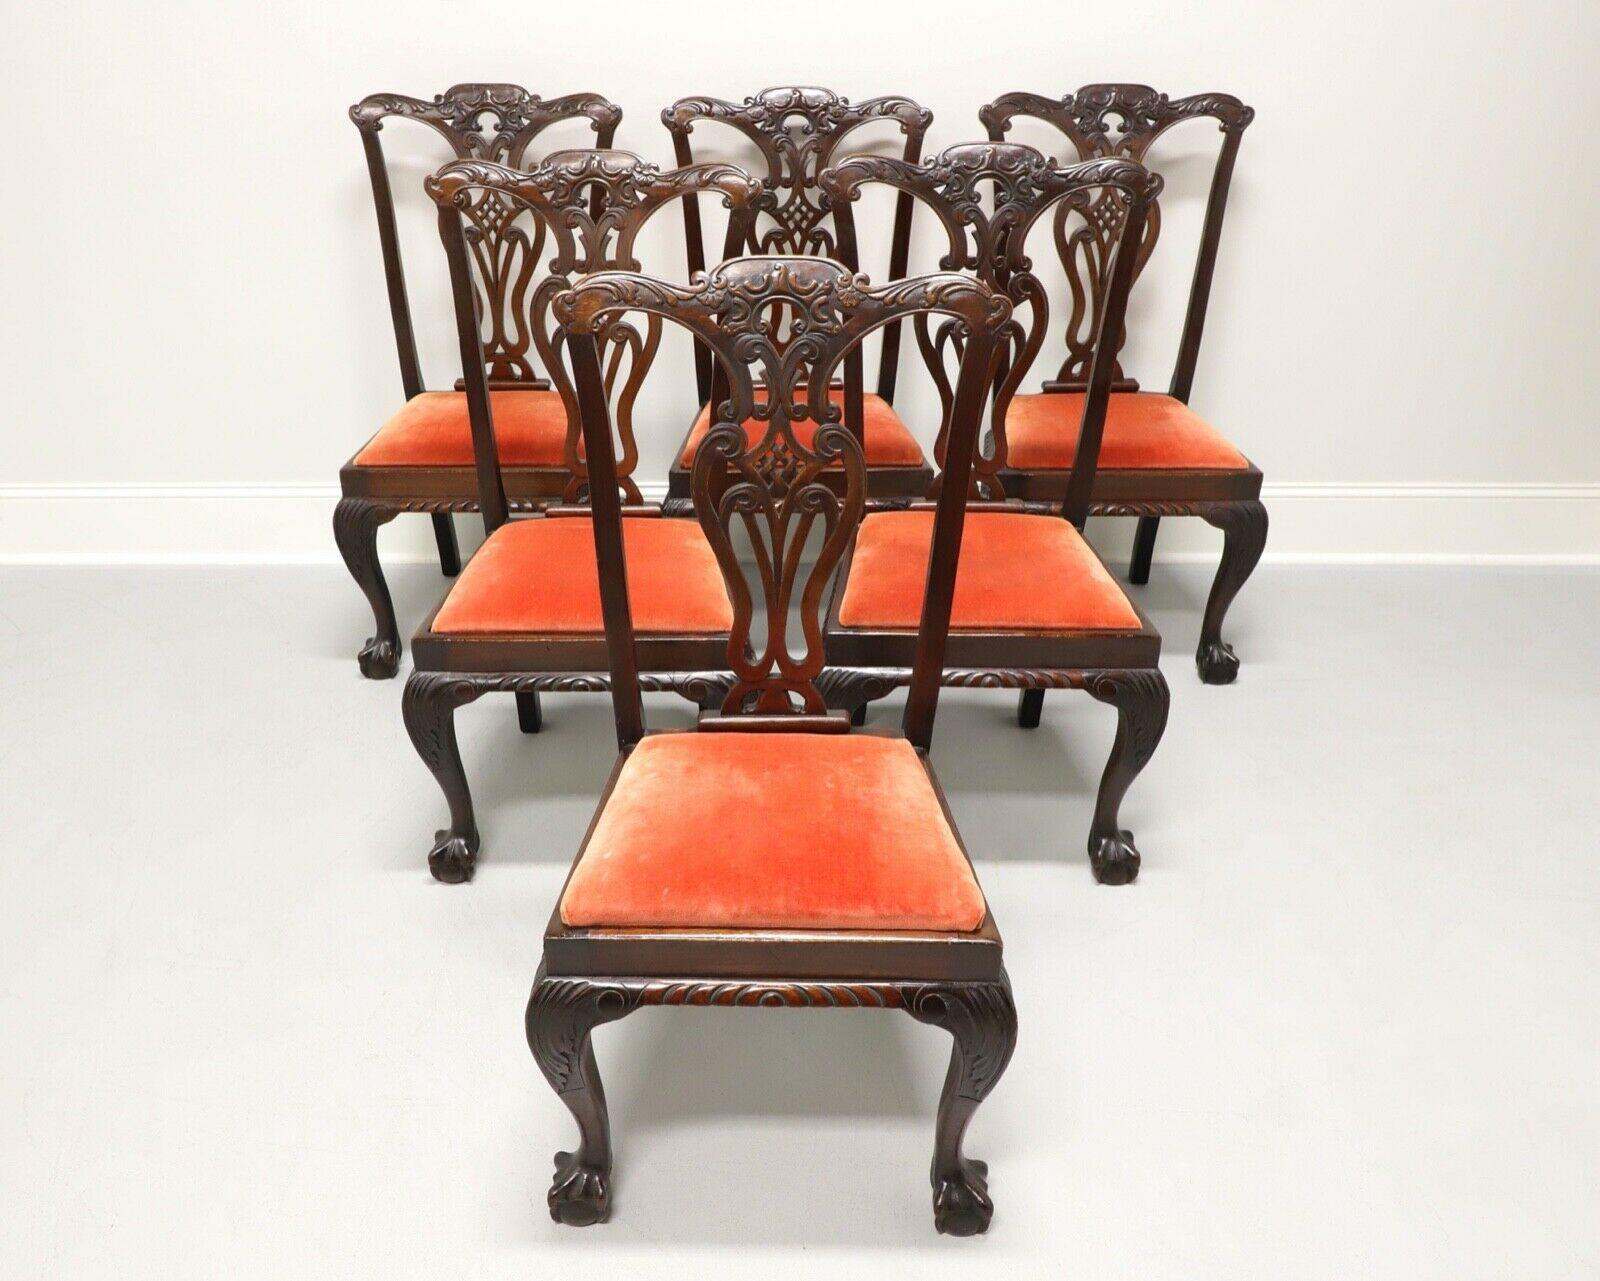 Antique 19th Century Mahogany English Chippendale Dining Side Chairs - Set of 6 For Sale 7